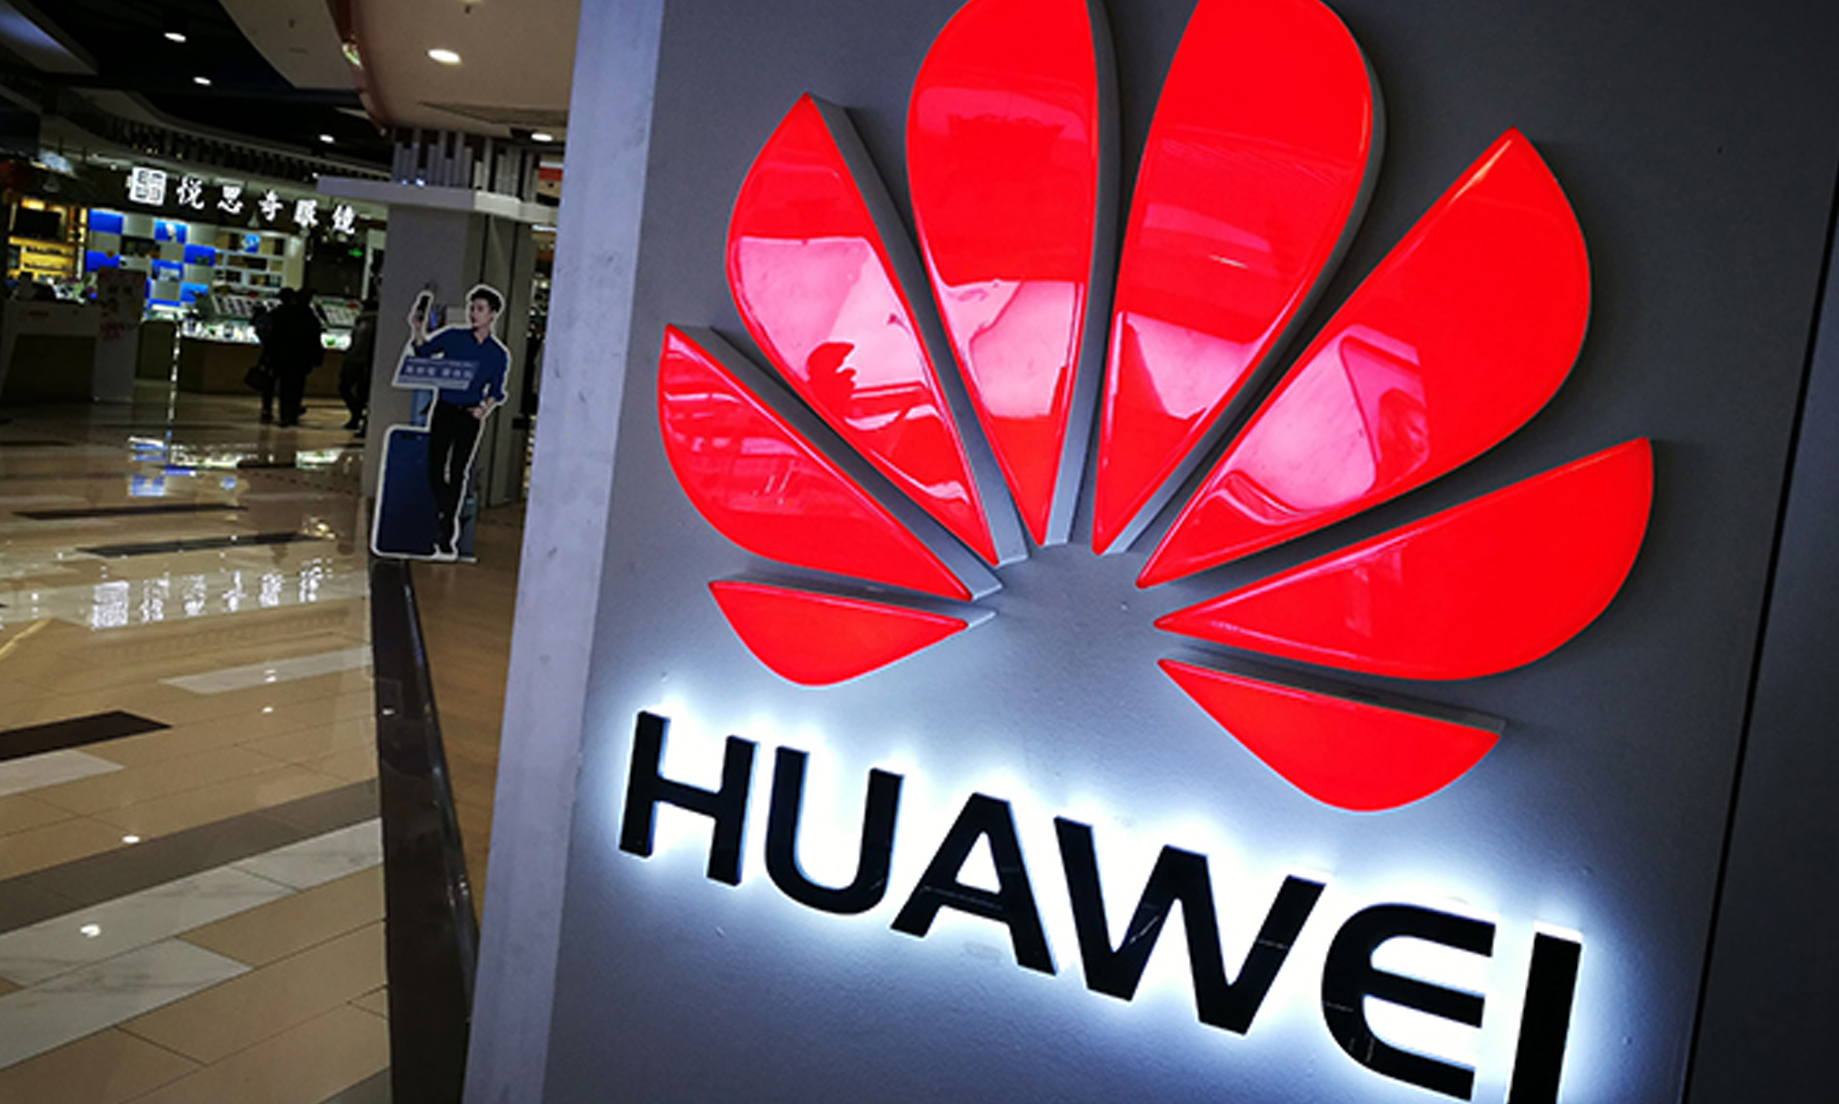 Finnish experts describe U.S. restrictions on Huawei as “rough” against “innocent users”